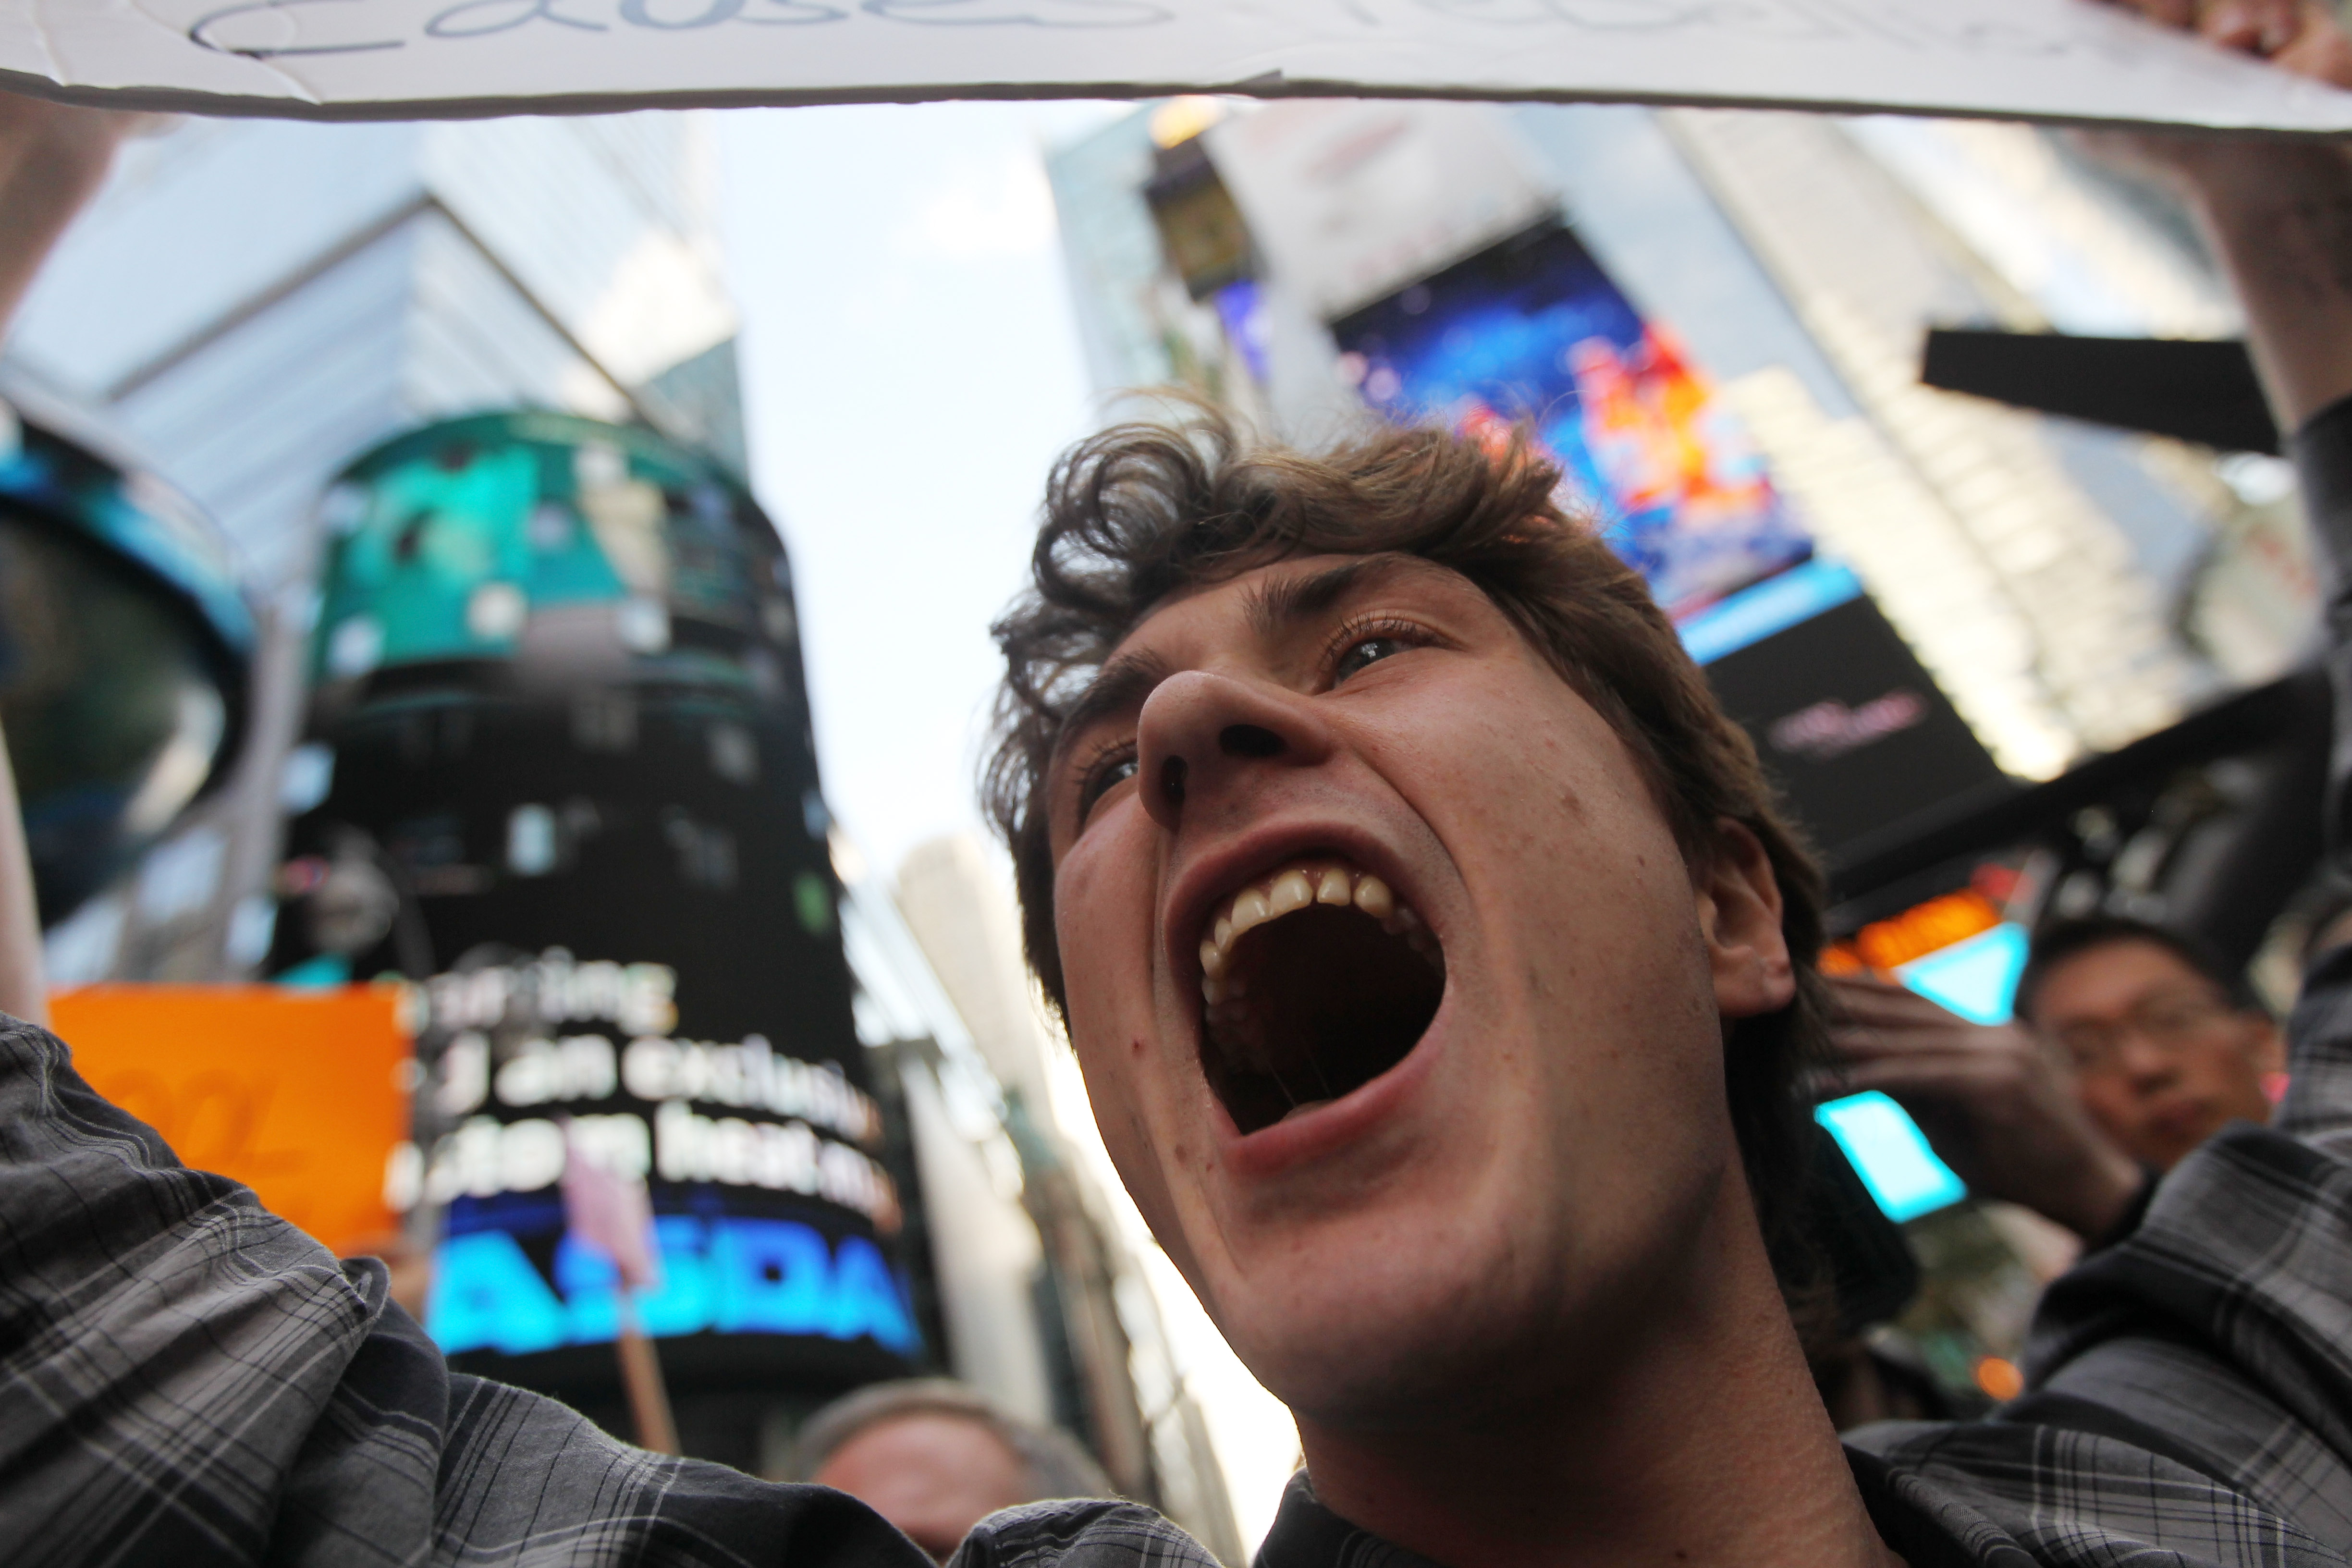 occupy-wall-street-in-times-square-10-15-115.jpg 